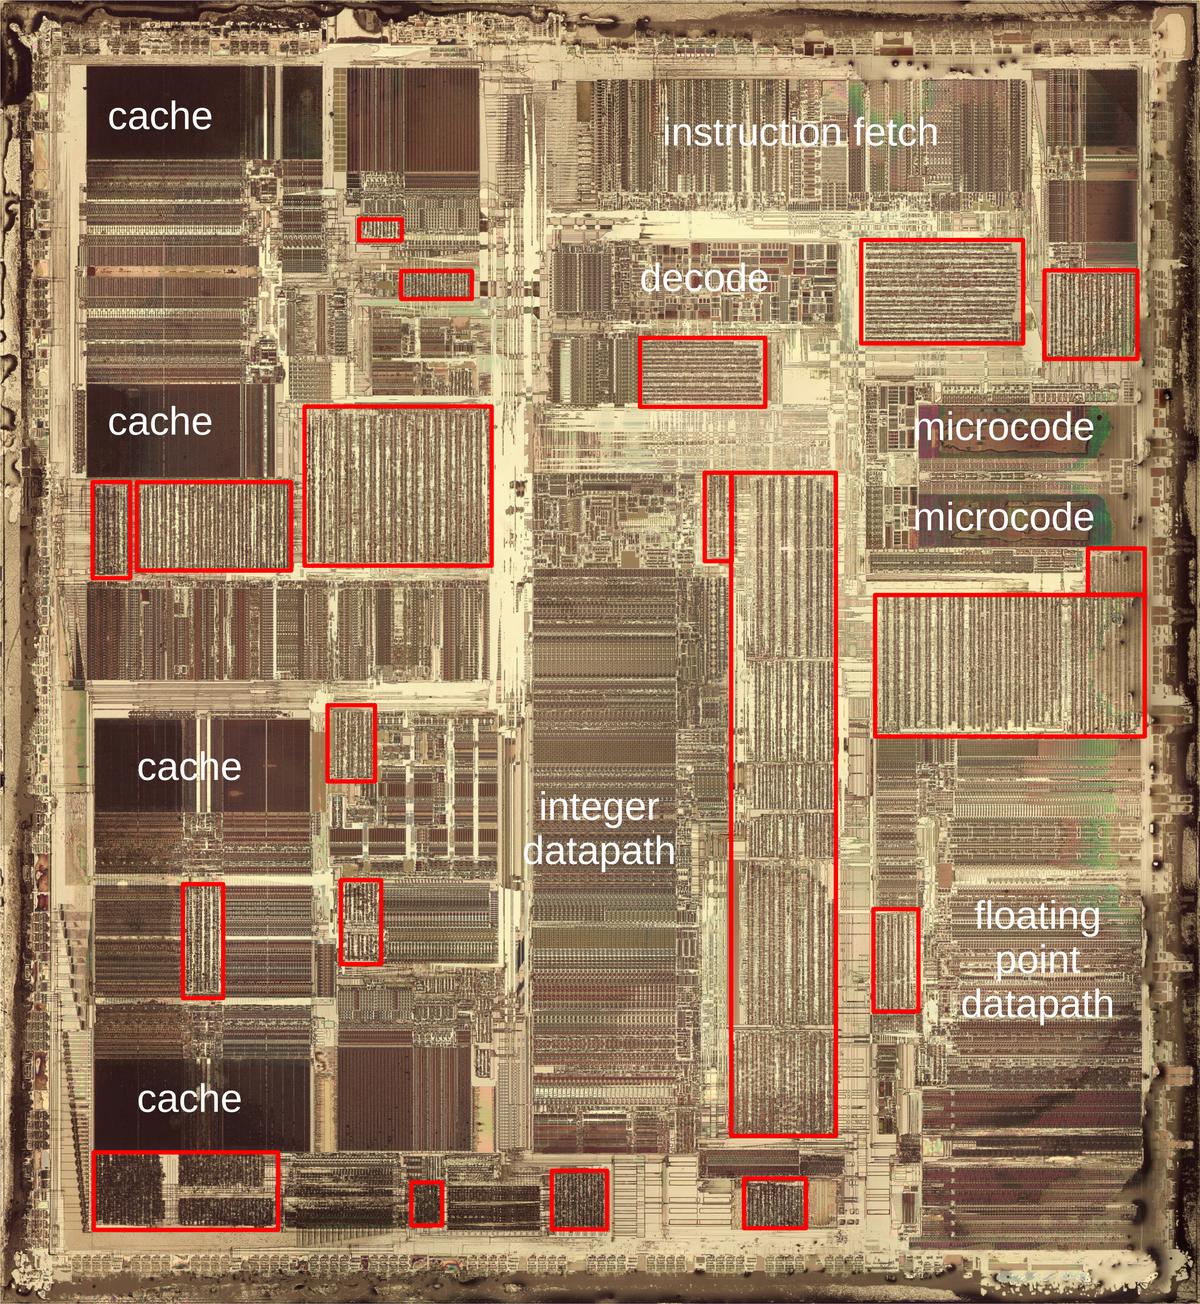 Die photo of the Intel Pentium processor with standard cells highlighted in red. The edges of the chip suffered some damage when I removed the metal layers. Click this image (or any other) for a larger version.